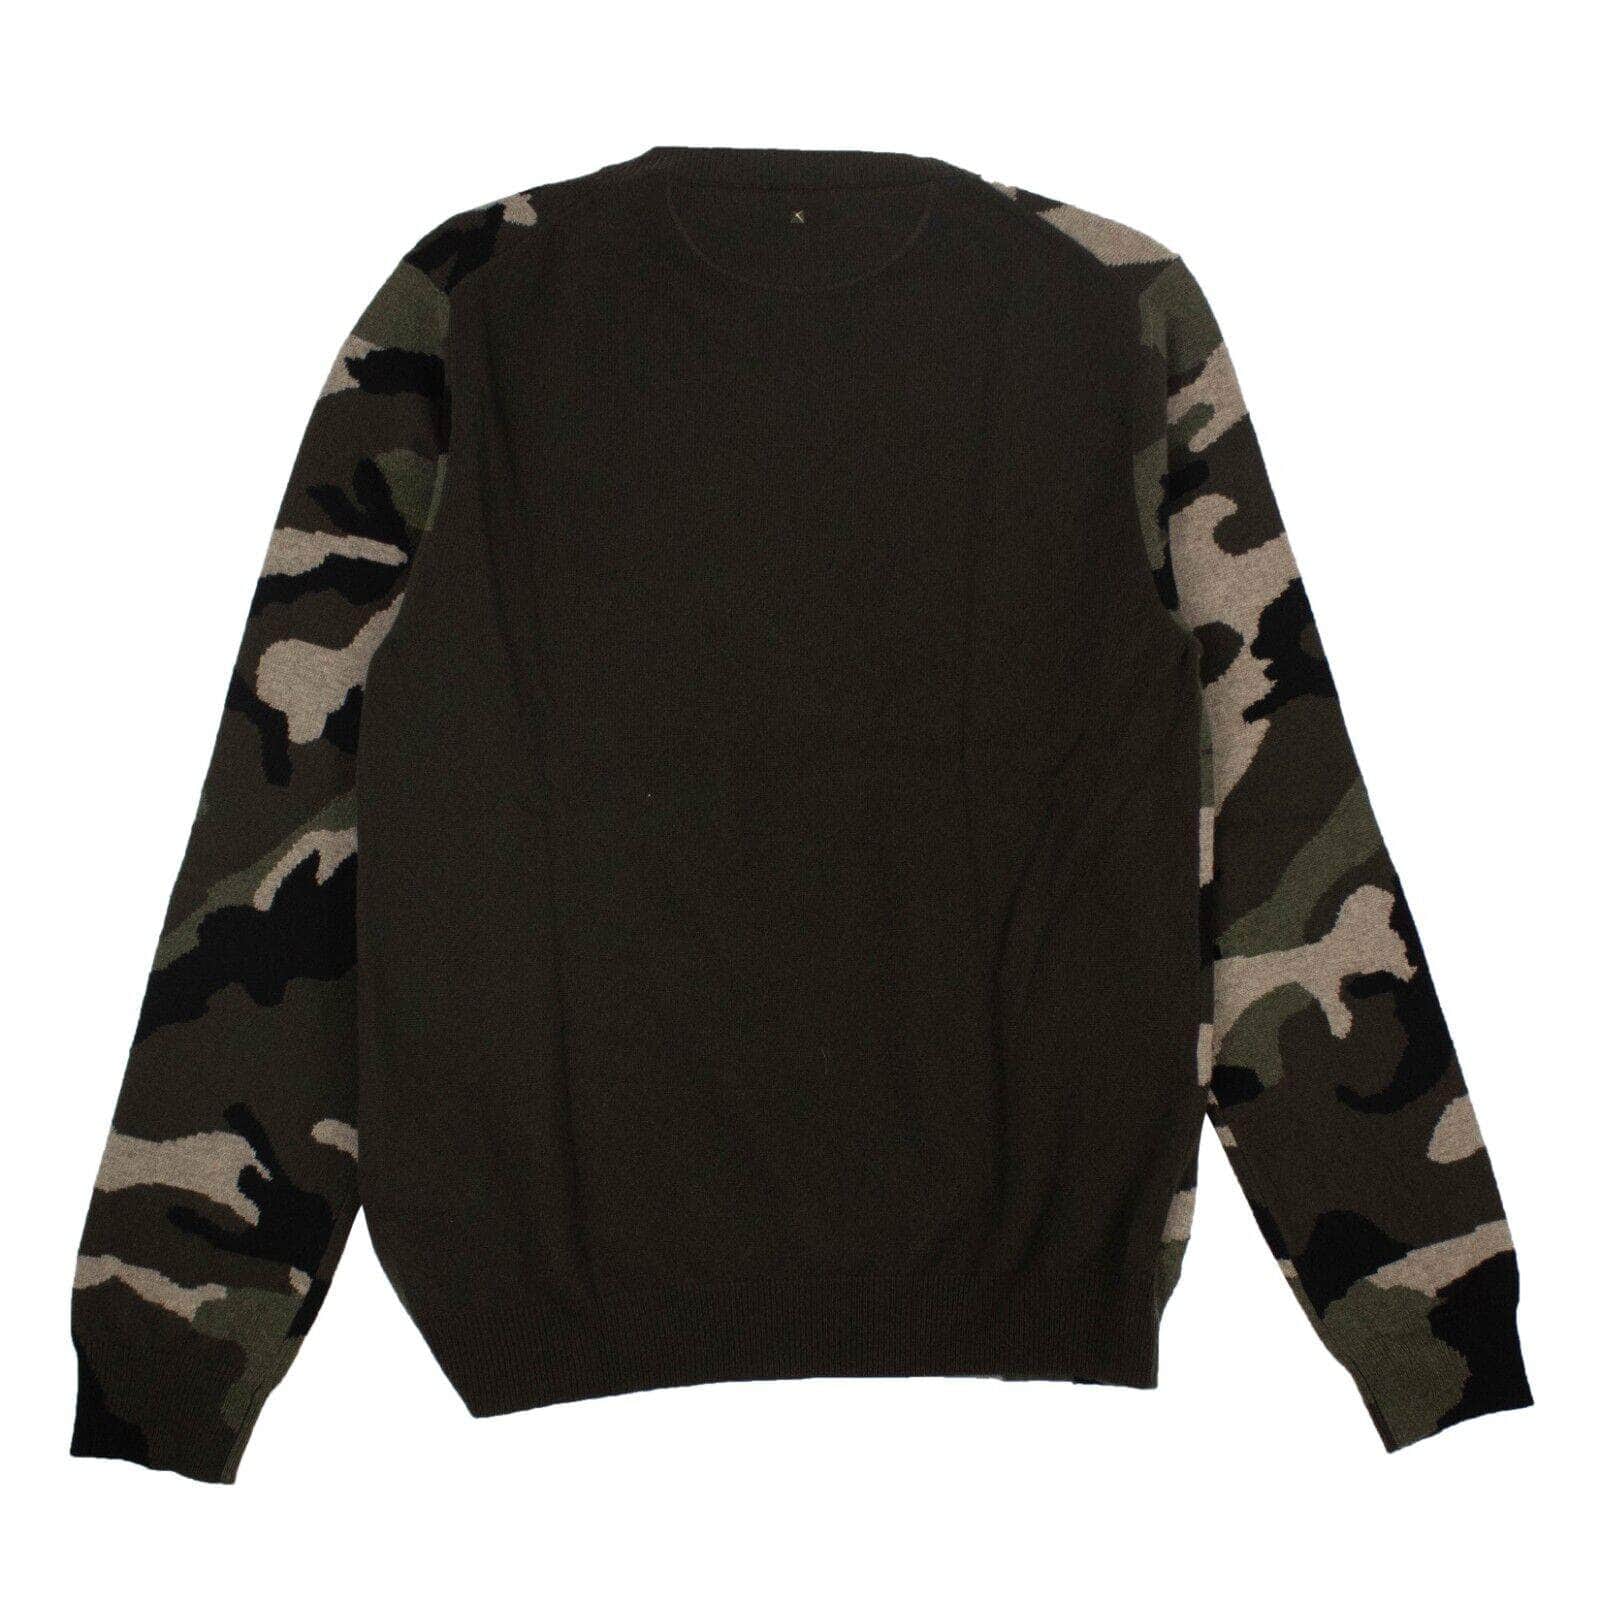 Valentino 500-750, channelenable-all, chicmi, couponcollection, gender-mens, main-clothing, mens-pullover-sweaters, mens-shoes, size-l, size-m, valentino M Green Maglia Giroccollo Camo Cashmere Sweater 95-VLT-1018/M 95-VLT-1018/M